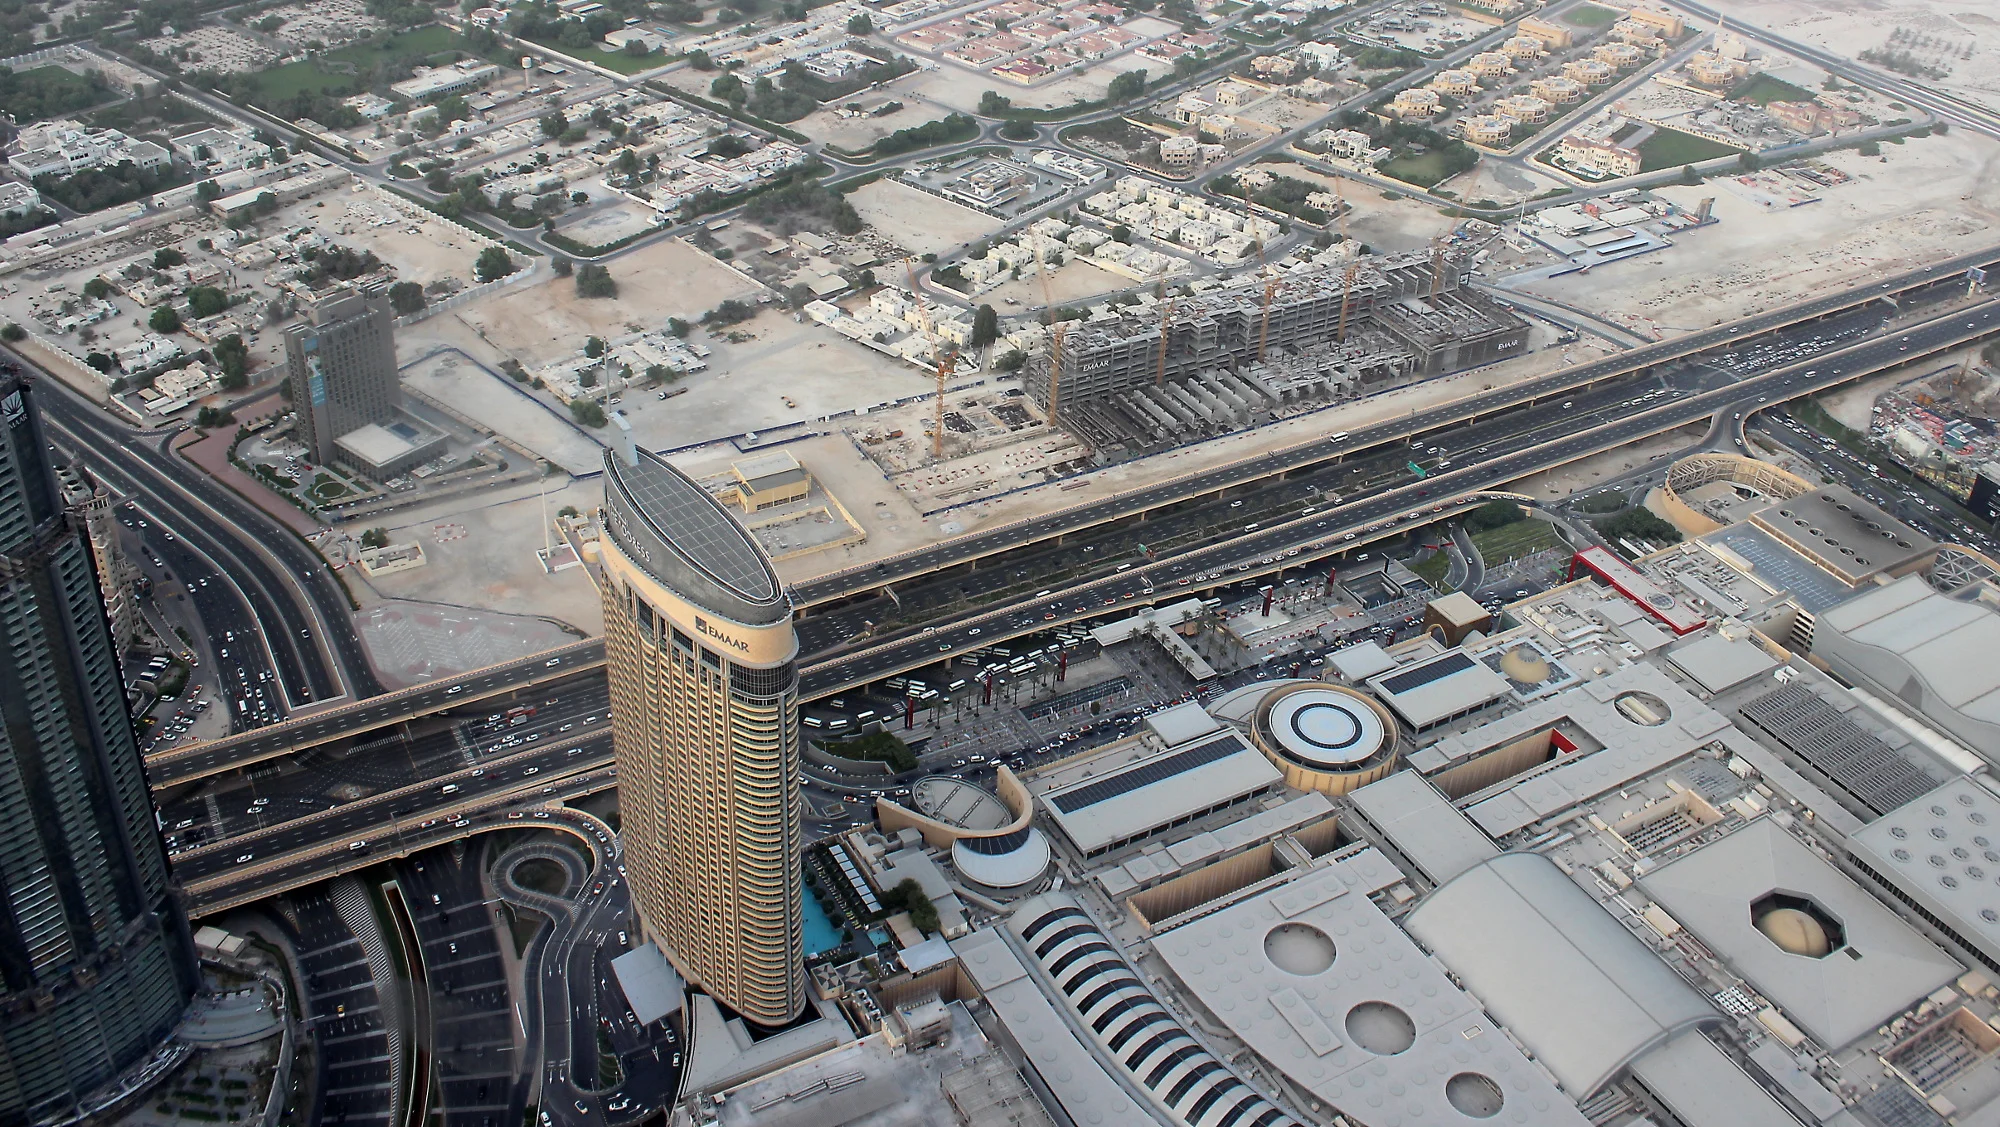 A view down from Burj Khalifa 124th floor observation deck in 2016.